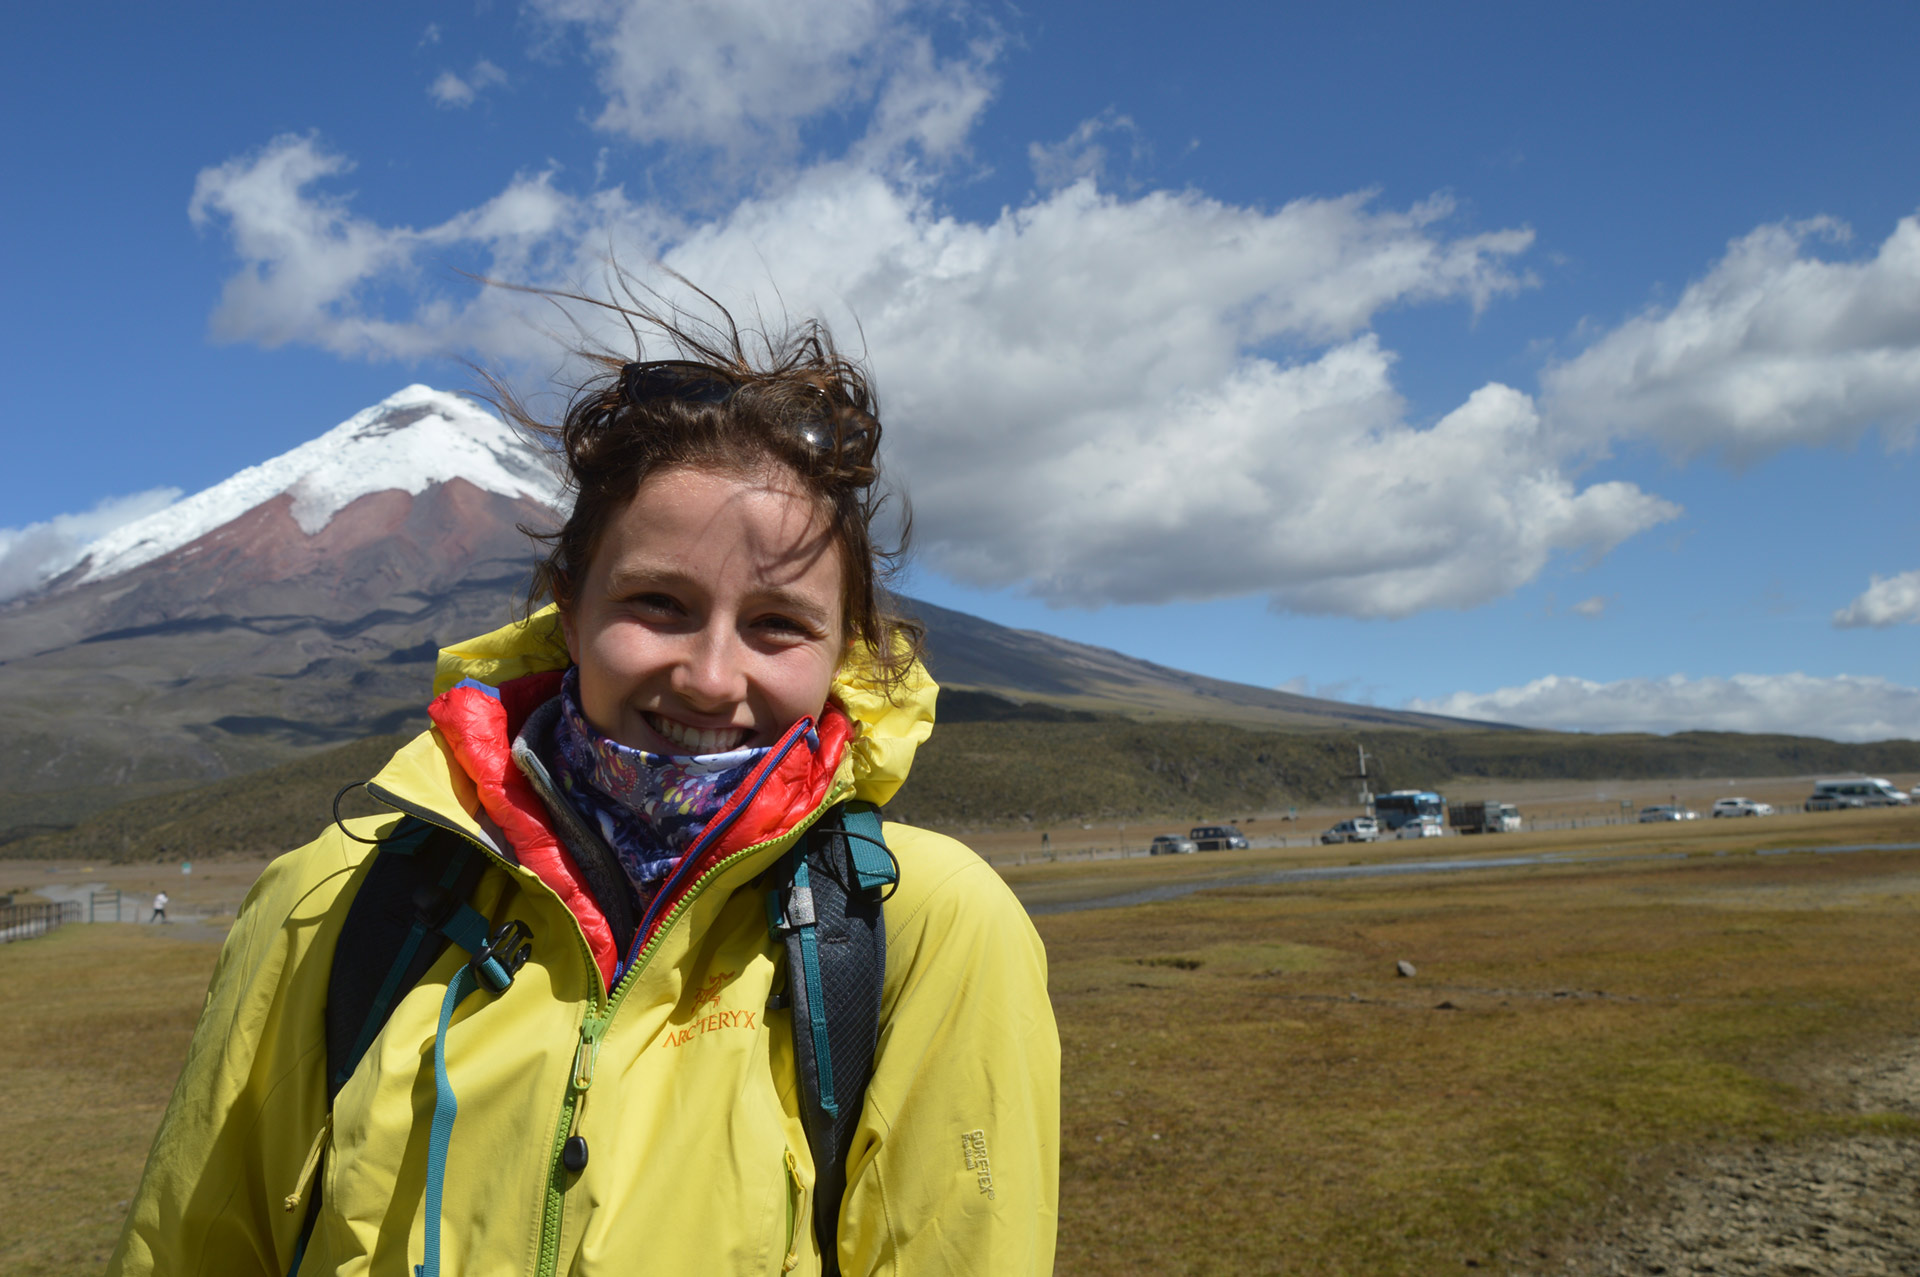 Hannah Springhorn traveling with the Watson Foundation